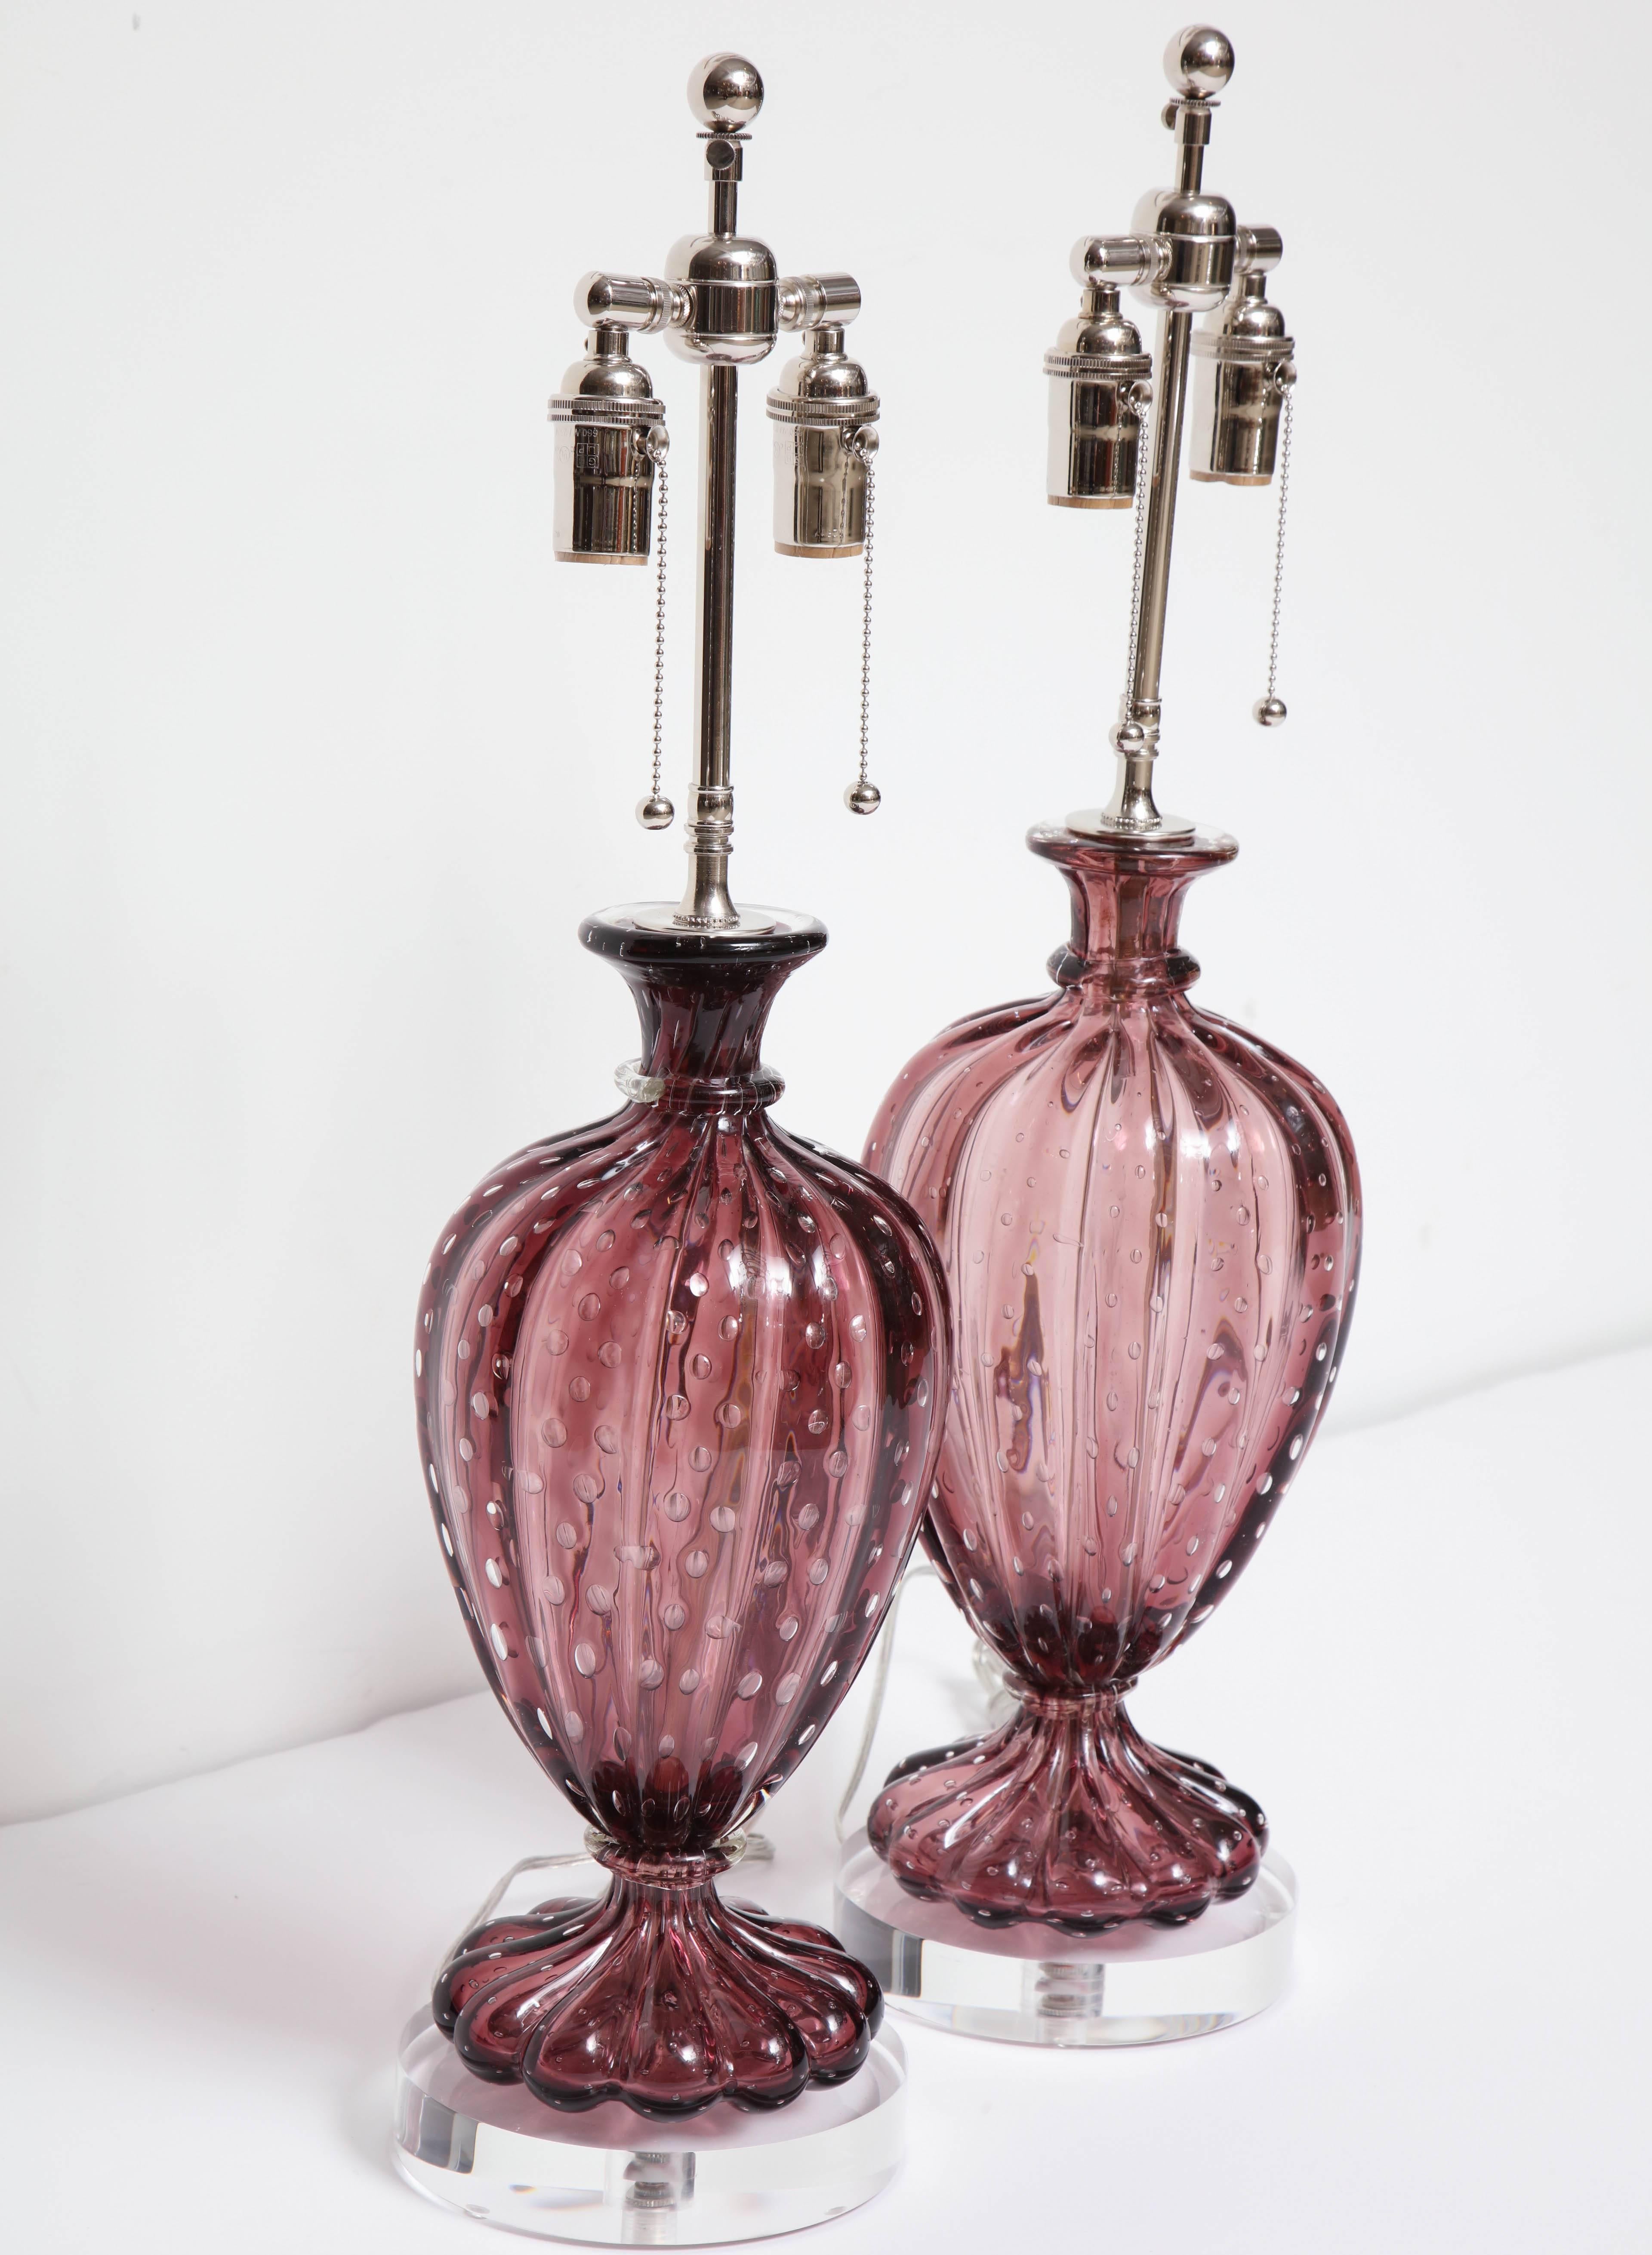 Beautiful large pair of Amethyst Barovier Lamps.
The handblown Amethyst color glass has controlled bubbles and are mounted on thick Lucite bases.
The lamps have been newly rewired for the US with polished nickel double clusters that take standard